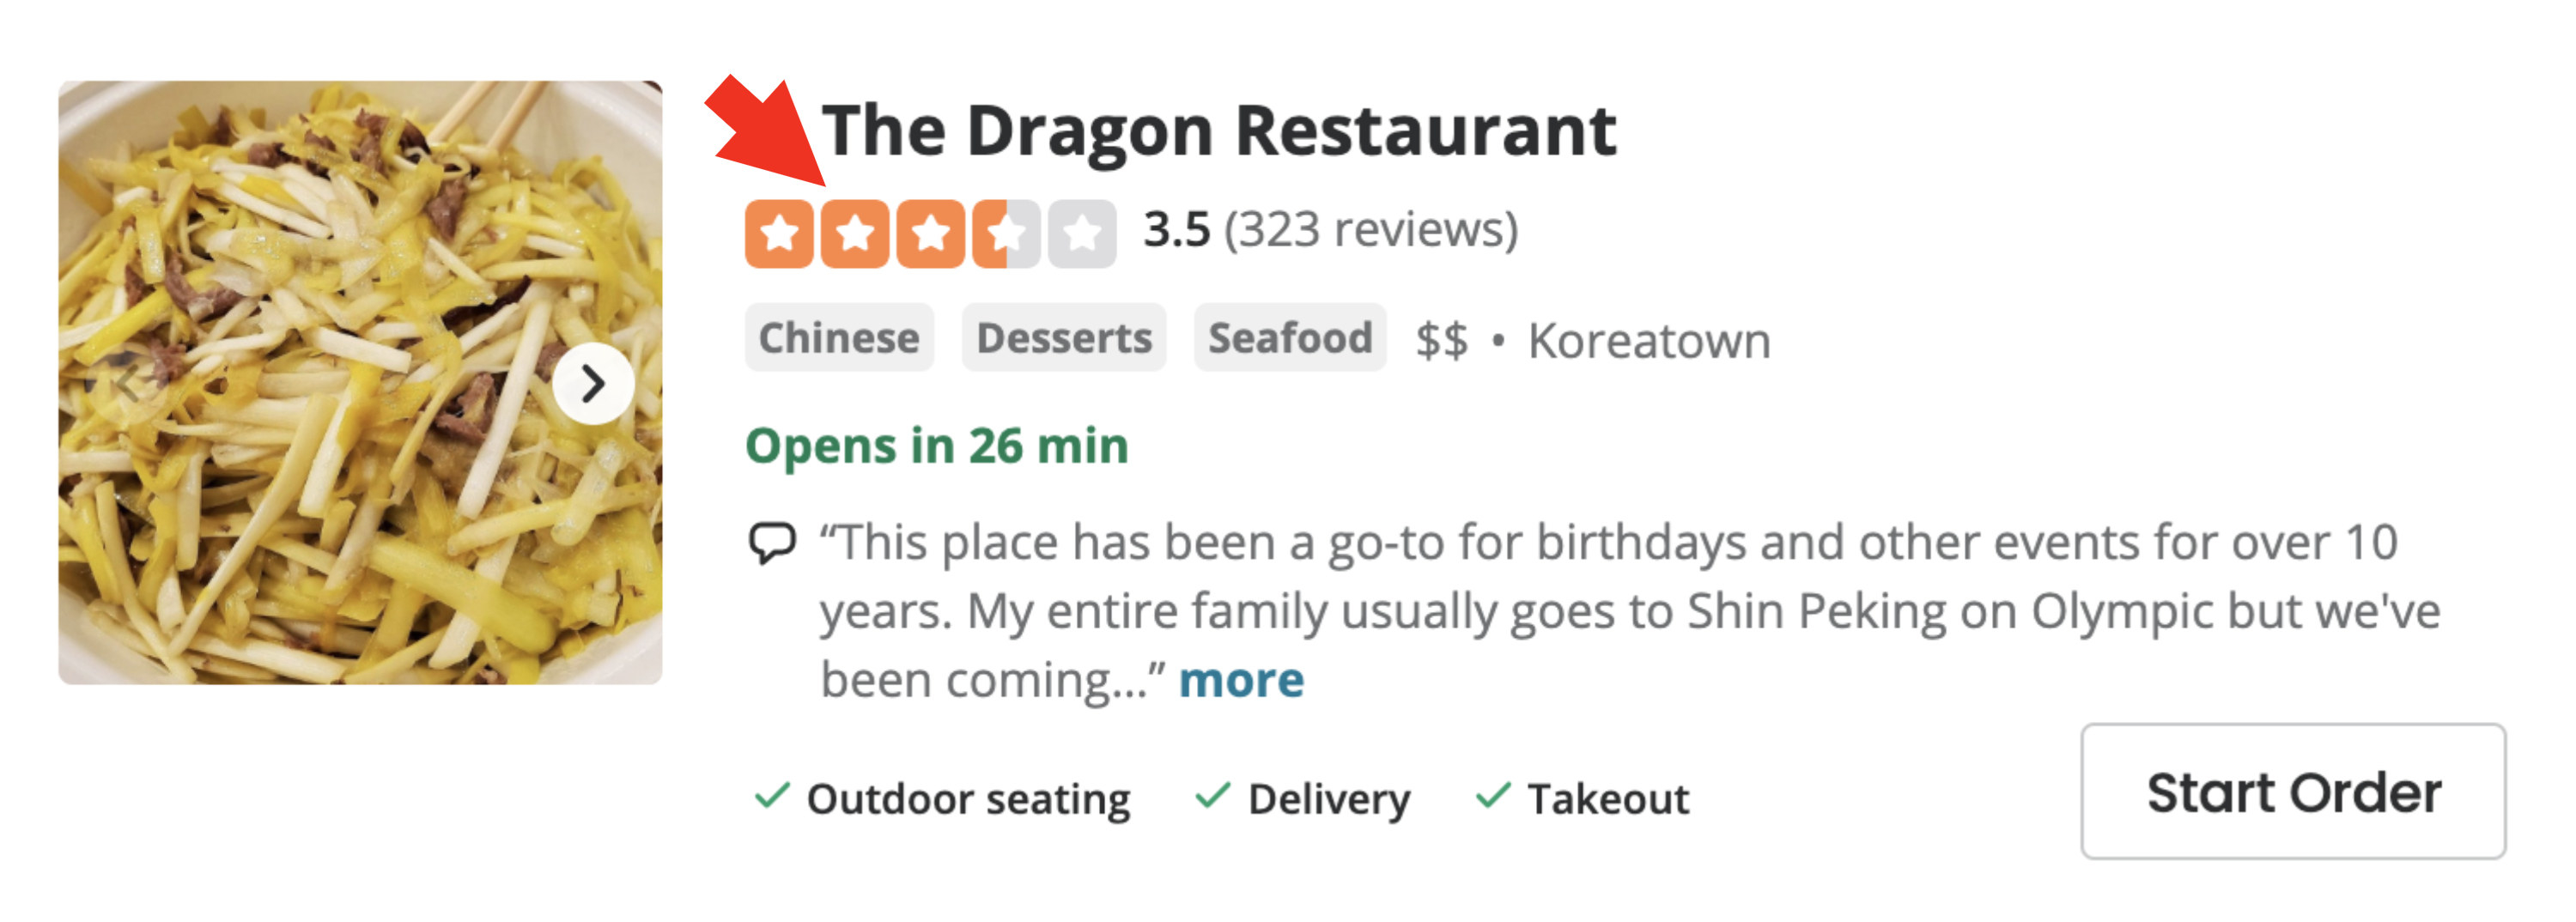 The Dragon Restaurant&#x27;s Yelp page